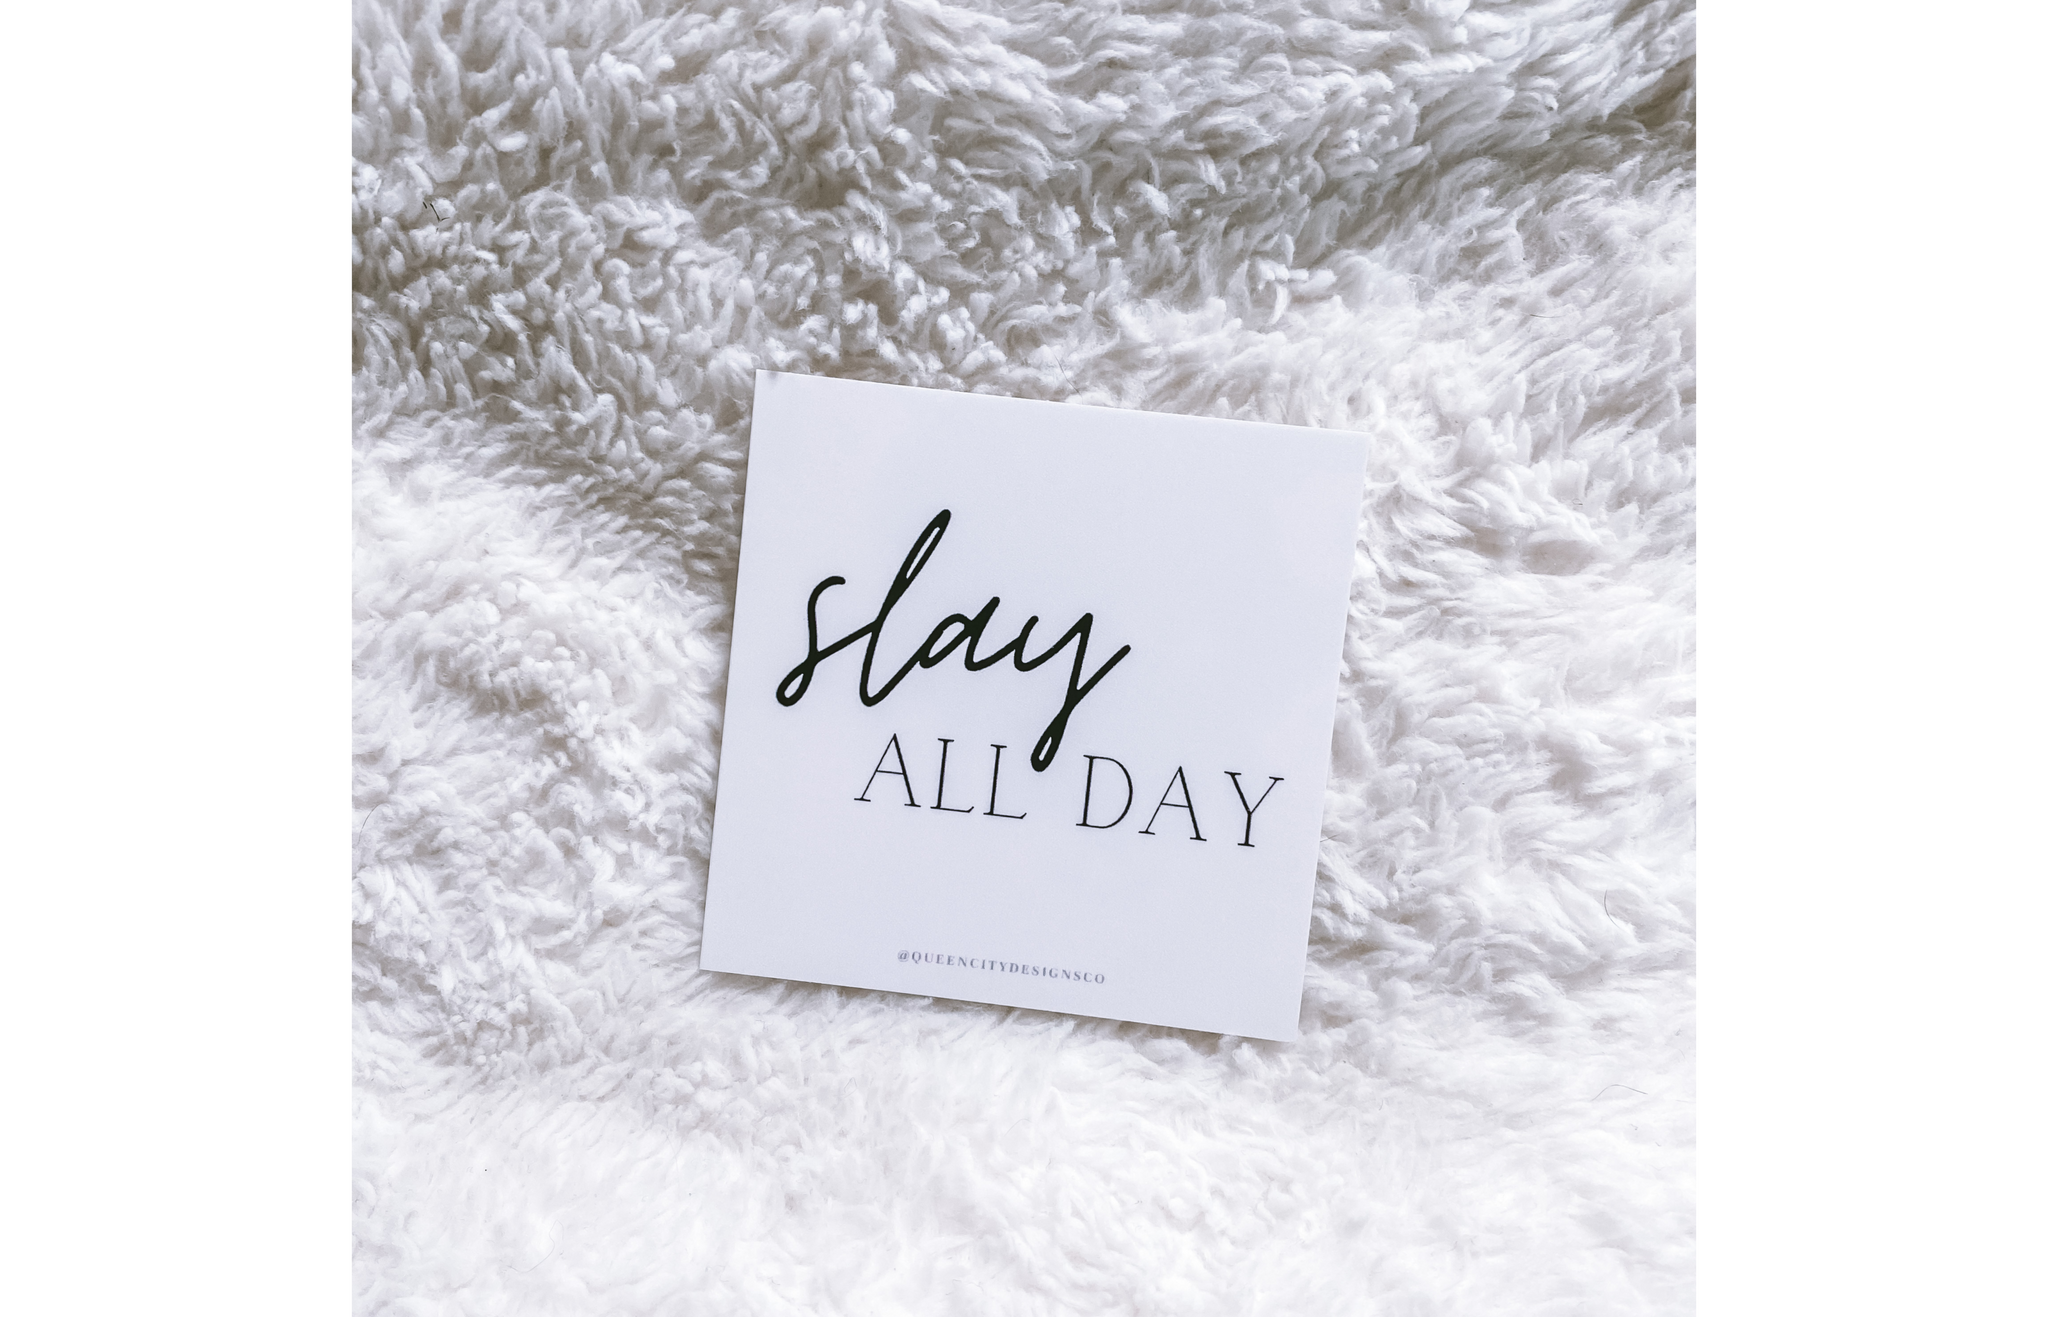 Slay All Day Journaling Card